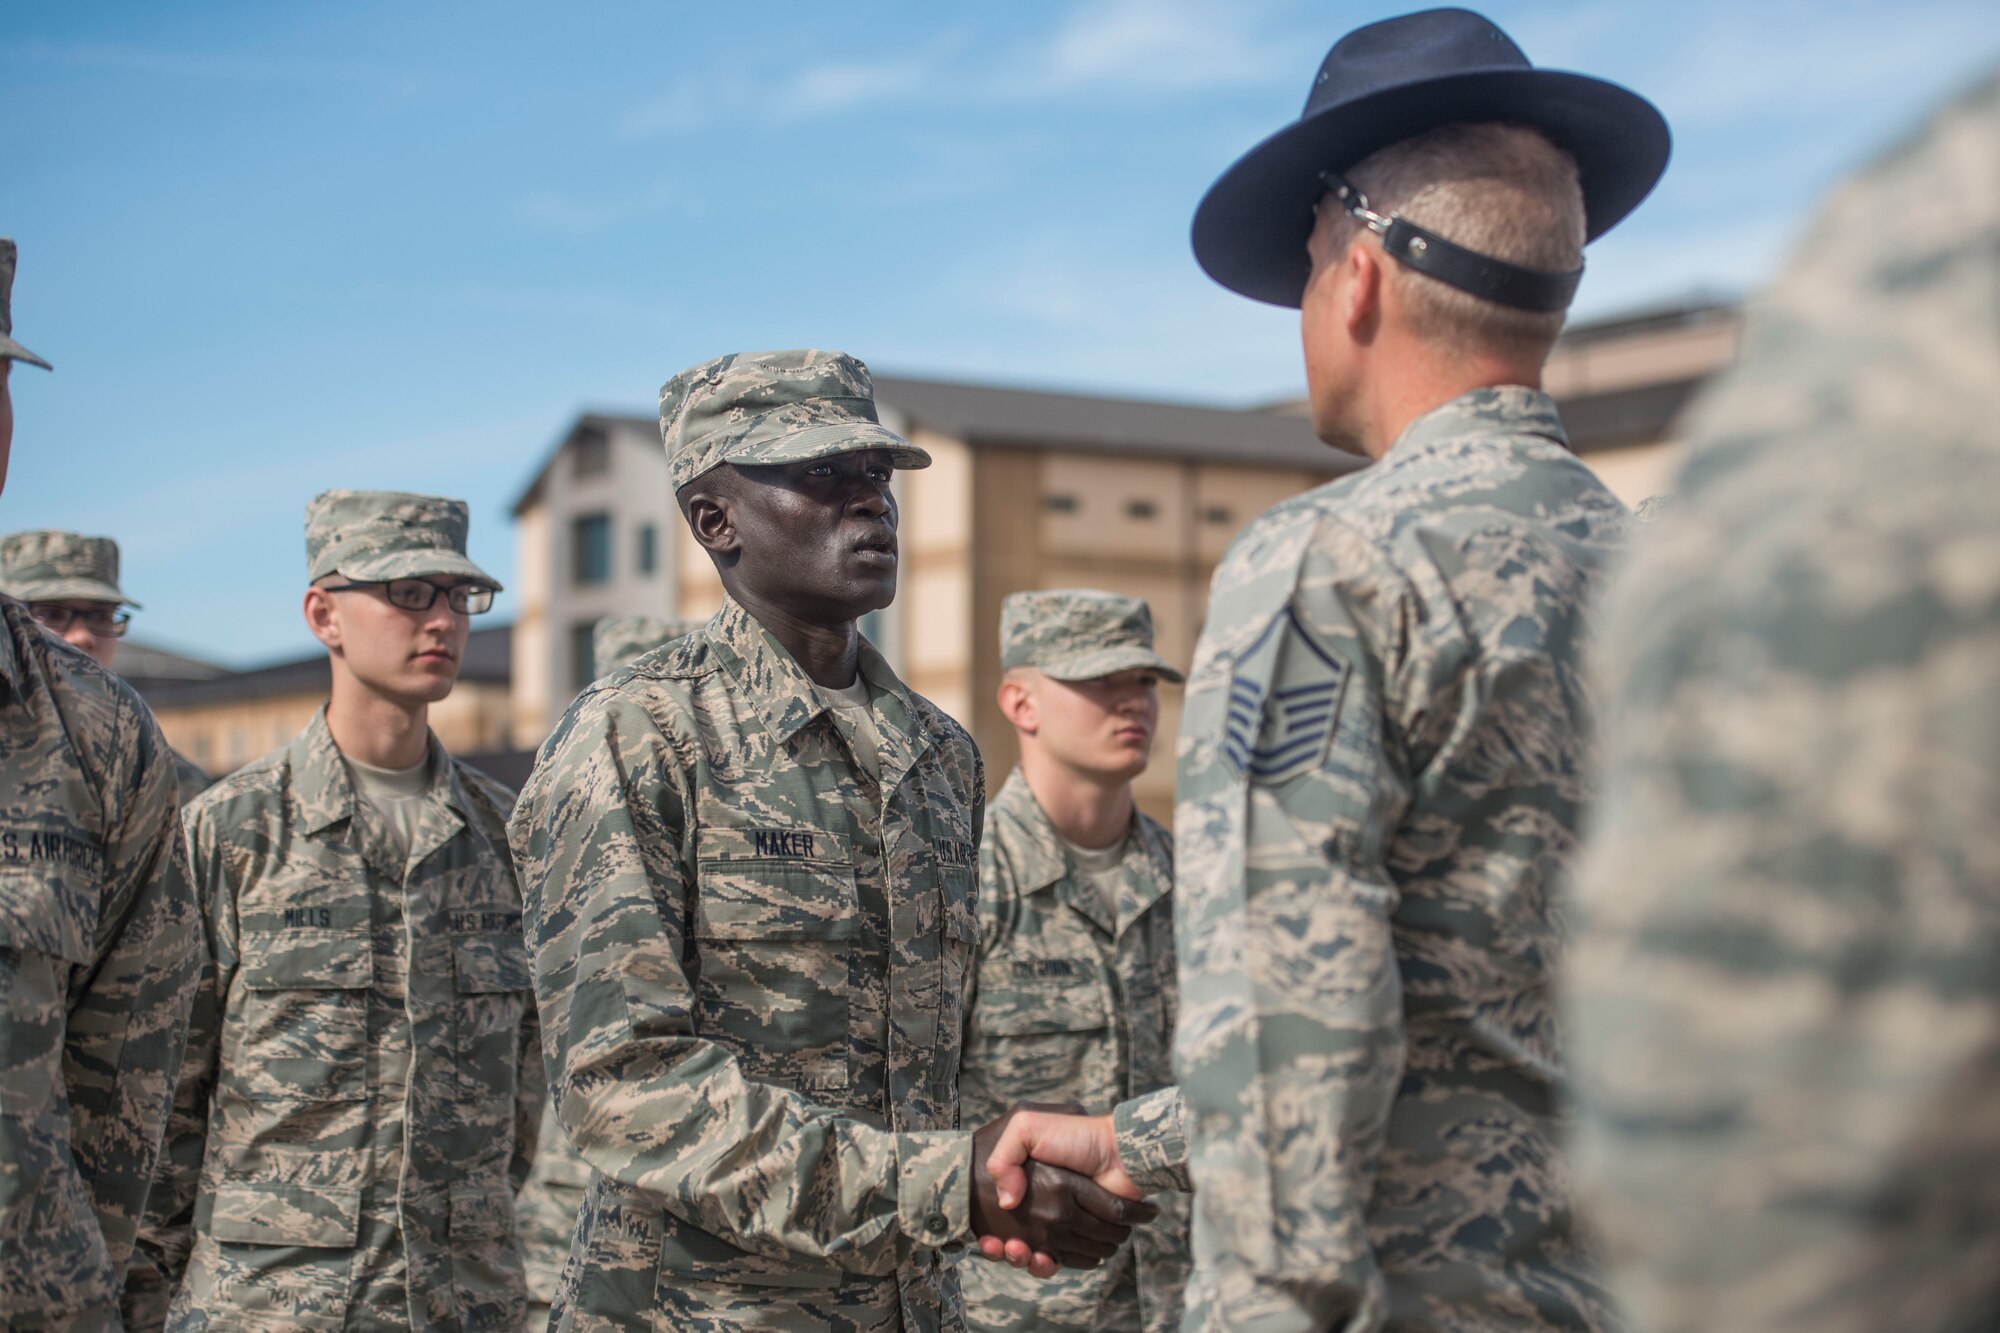 Gour Maker, a trainee at Air Force Basic Military Training, receives an “Airman’s Coin” at the Coin Ceremony Feb. 1, 2018 outside the Pfingston Reception Center at Joint Base San Antonio-Lackland, Texas. During the BMT Coin Ceremony Trainees are given “Airman’s Coins’ signifying the final transition from trainee to Airman. (U.S. Air Force photo by Airman 1st Class Dillon Parker)